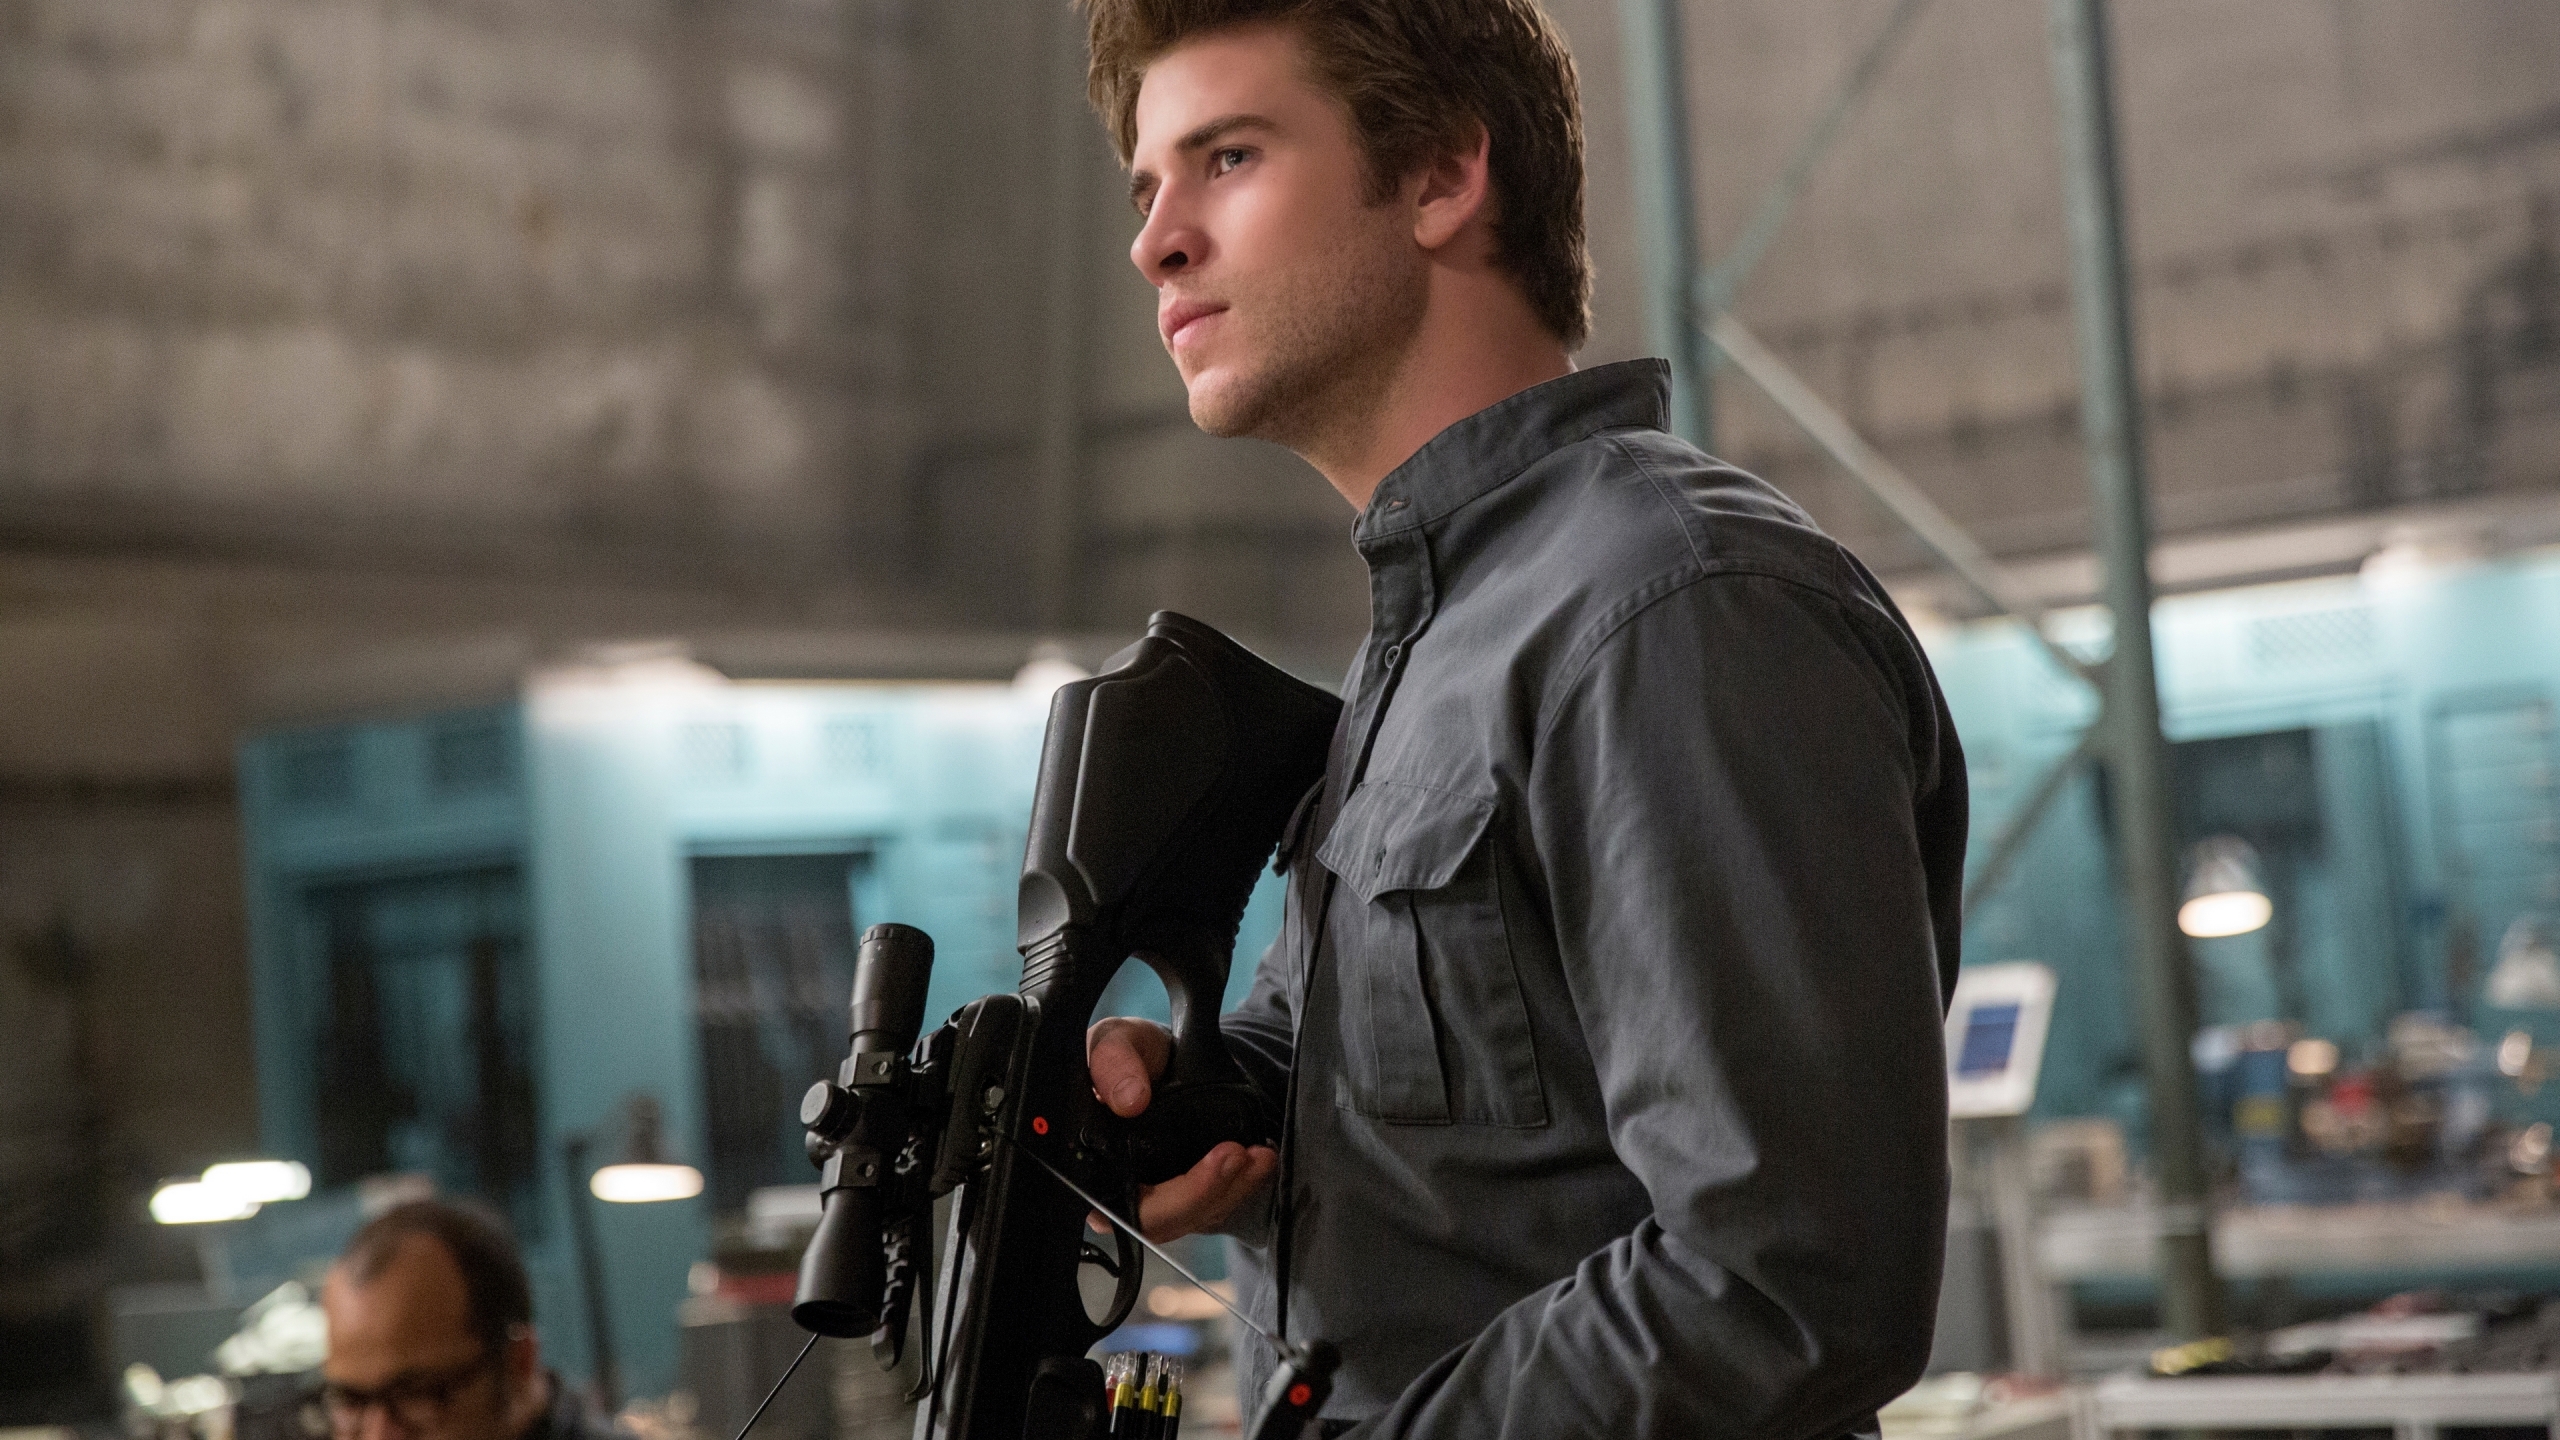 Liam Hemsworth in The Hunger Games for 2560x1440 HDTV resolution